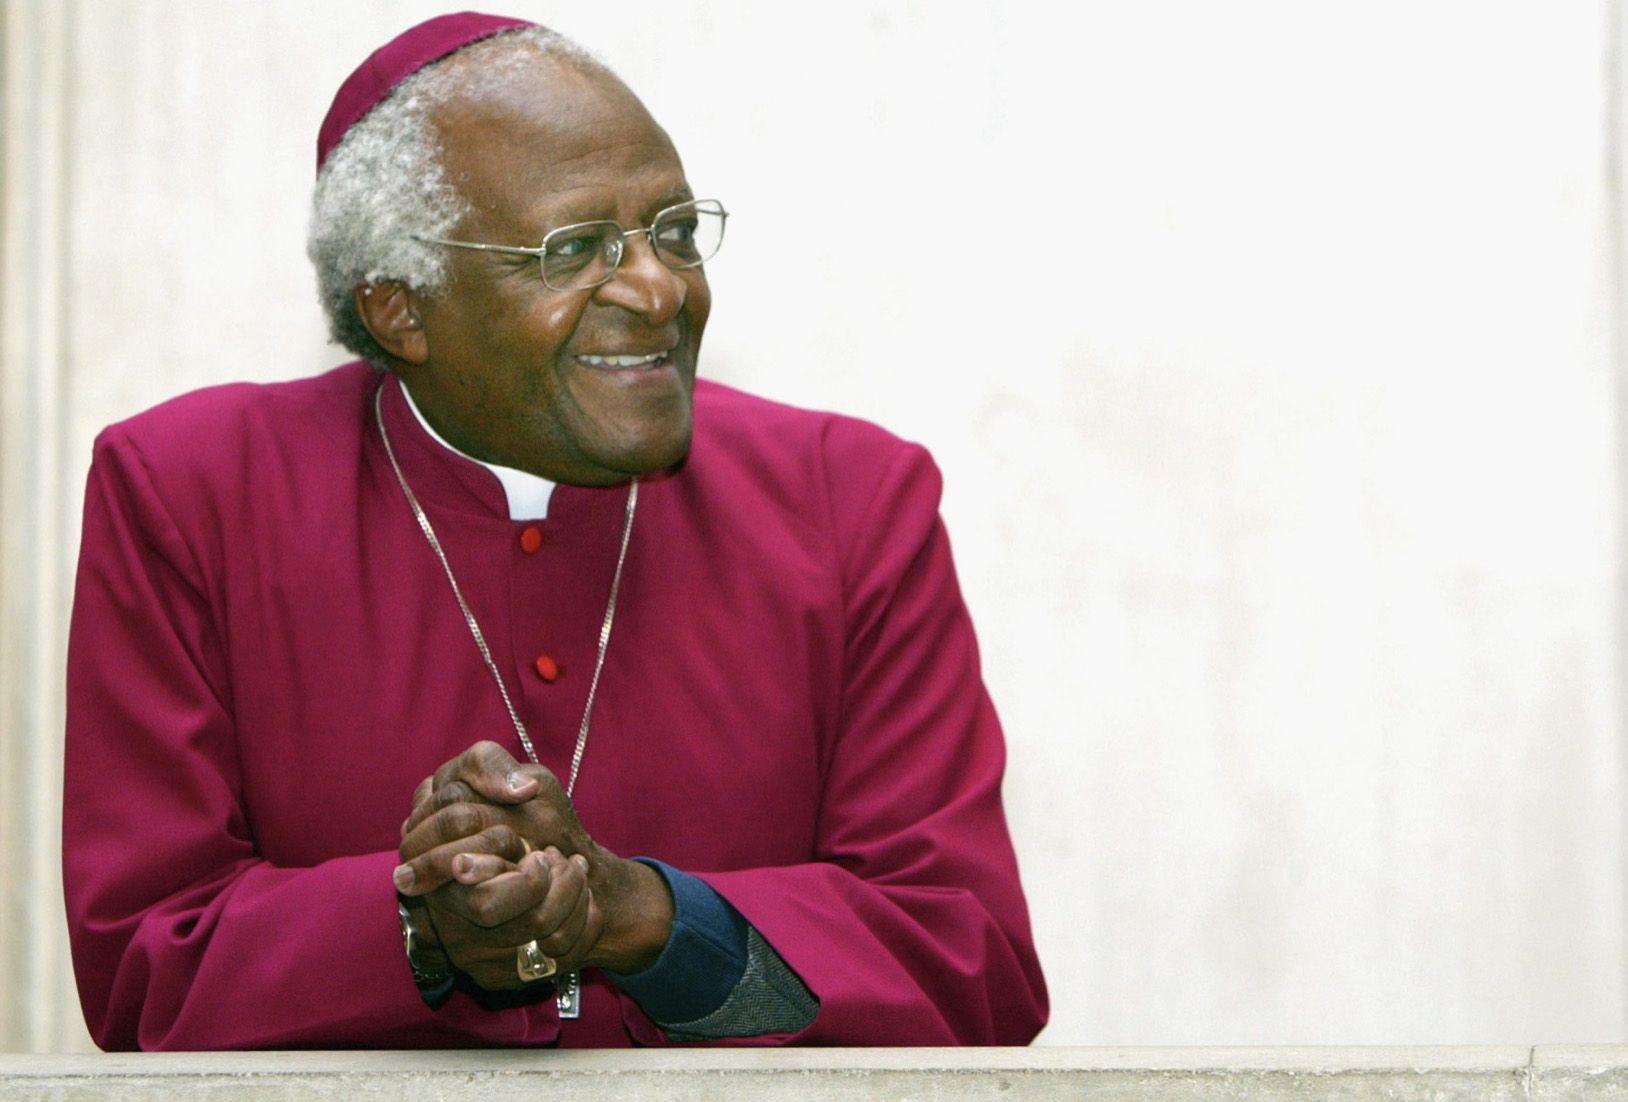 SUPPORT: The late Archbishop Desmond Tutu was a passionate supporter of gay rights